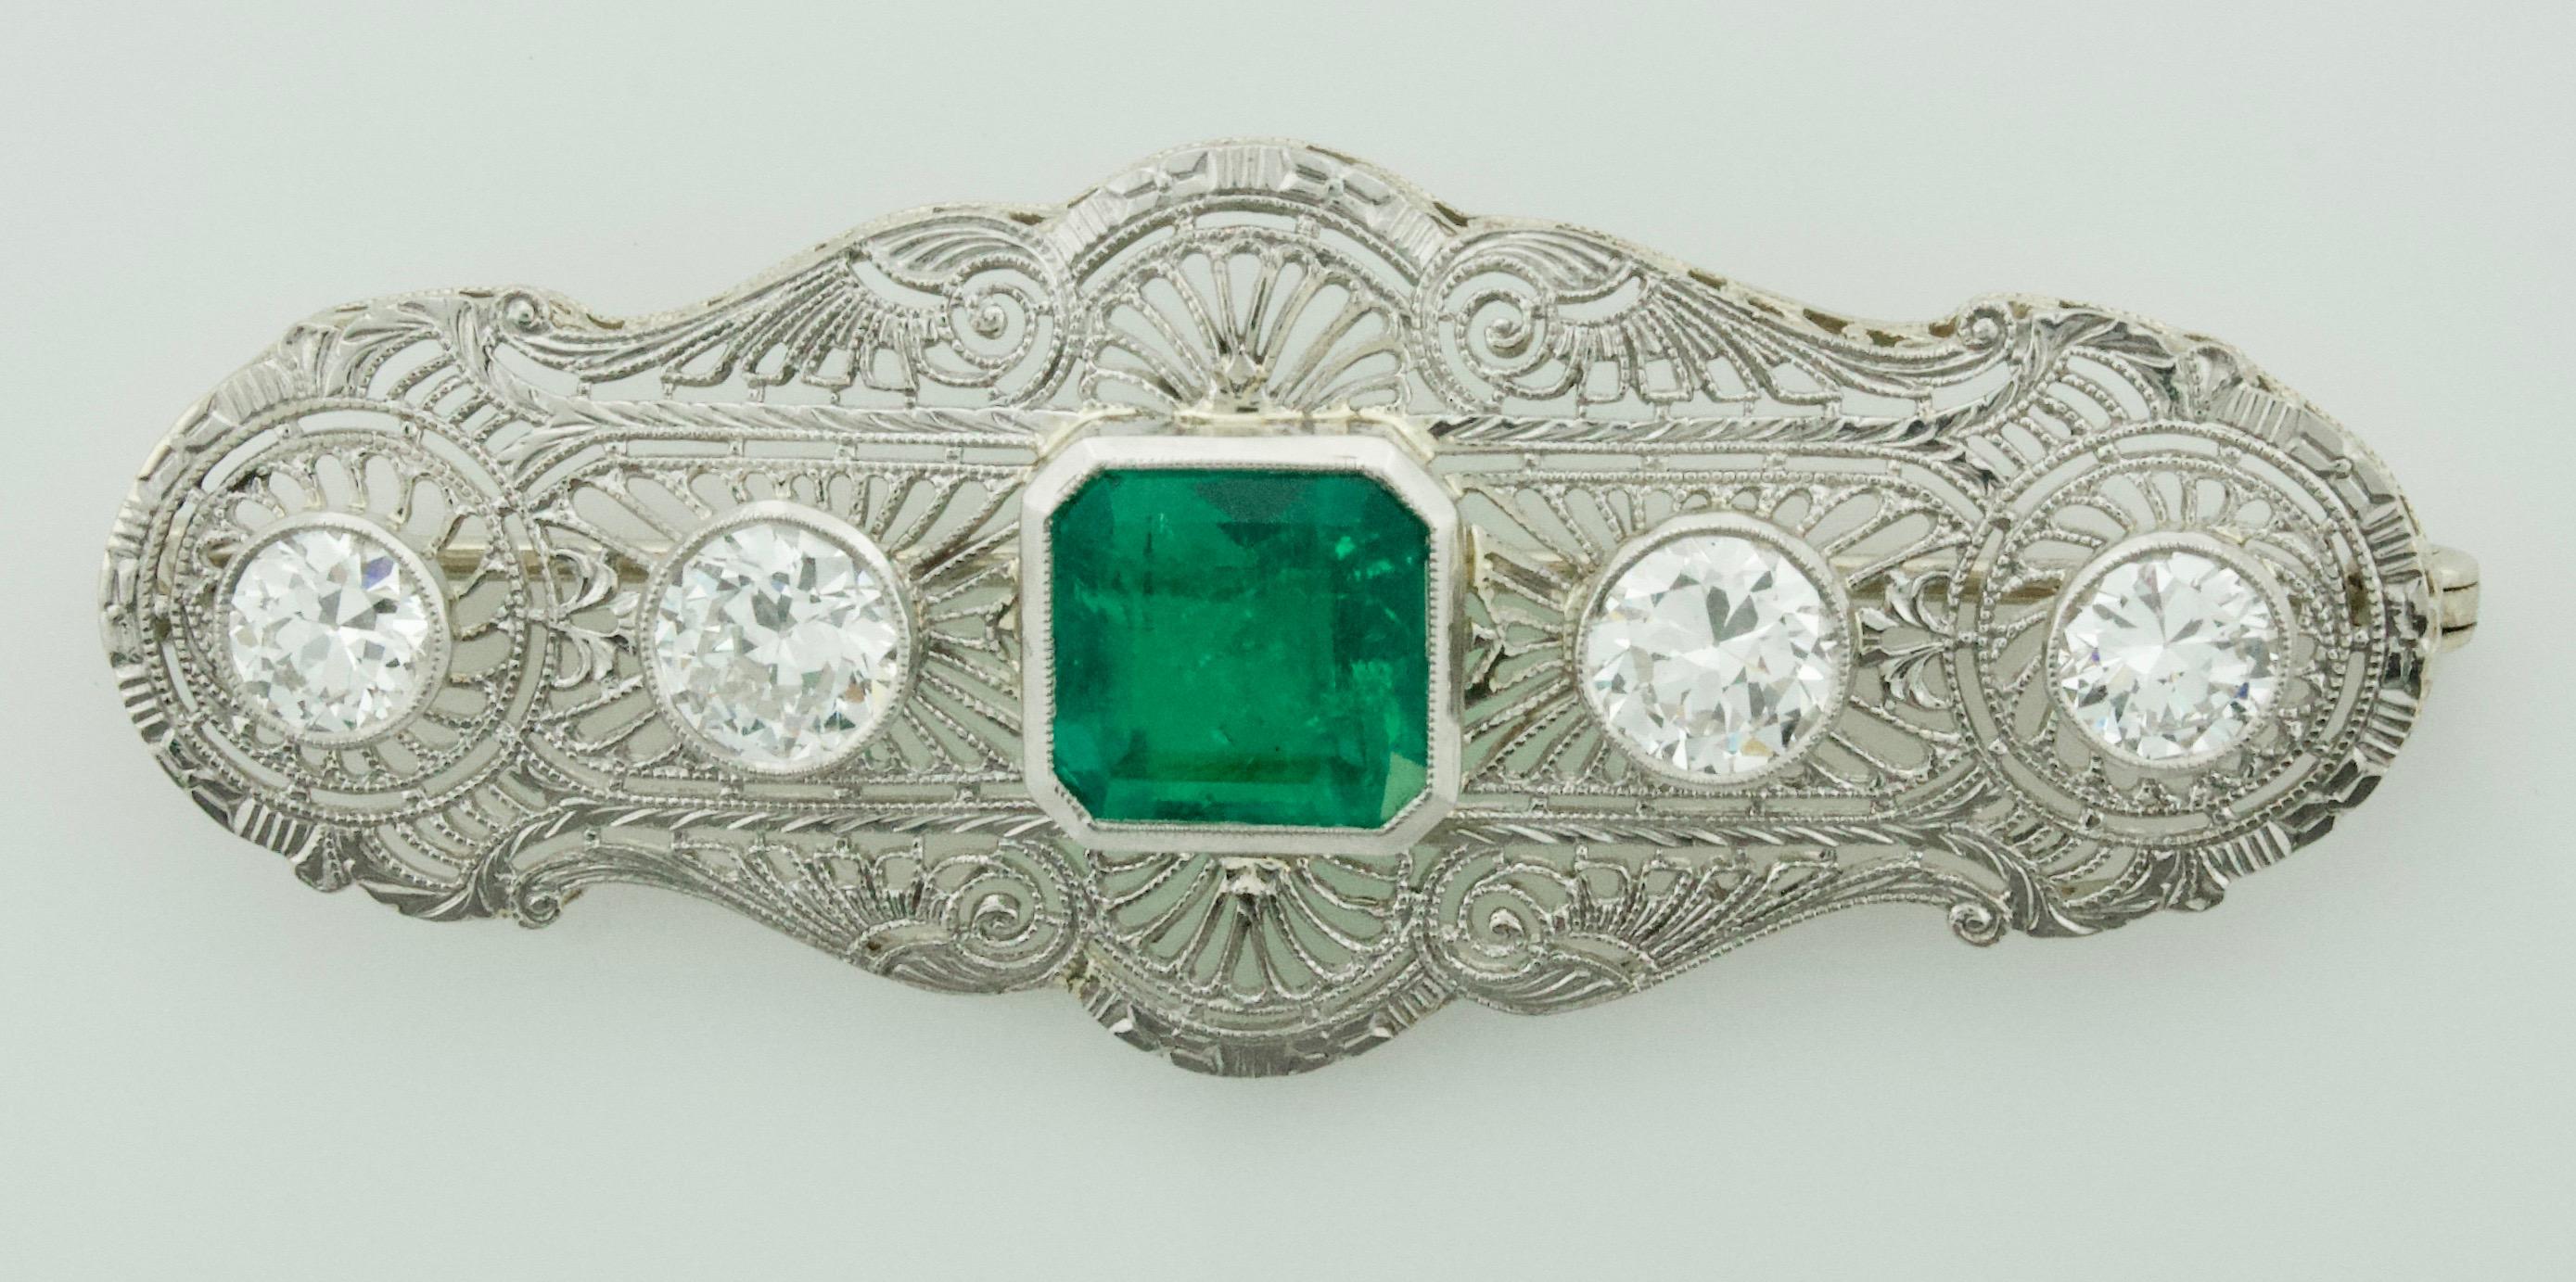 jewelry from the 1920s